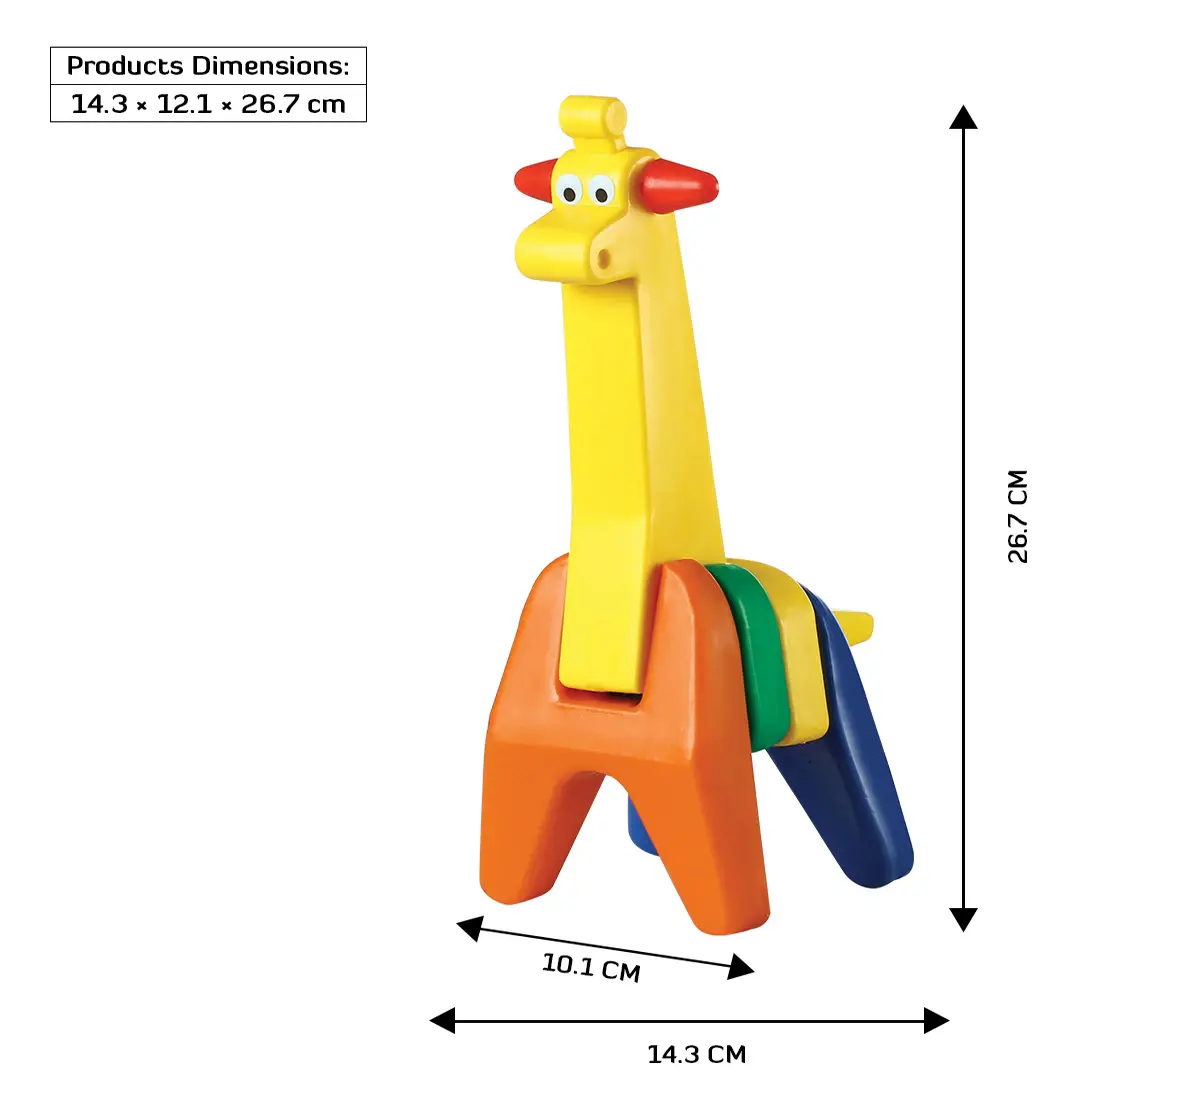 Shooting star My Pet Giraffe Toy for toddlers Plastic giraffe Multicolor 1Y+